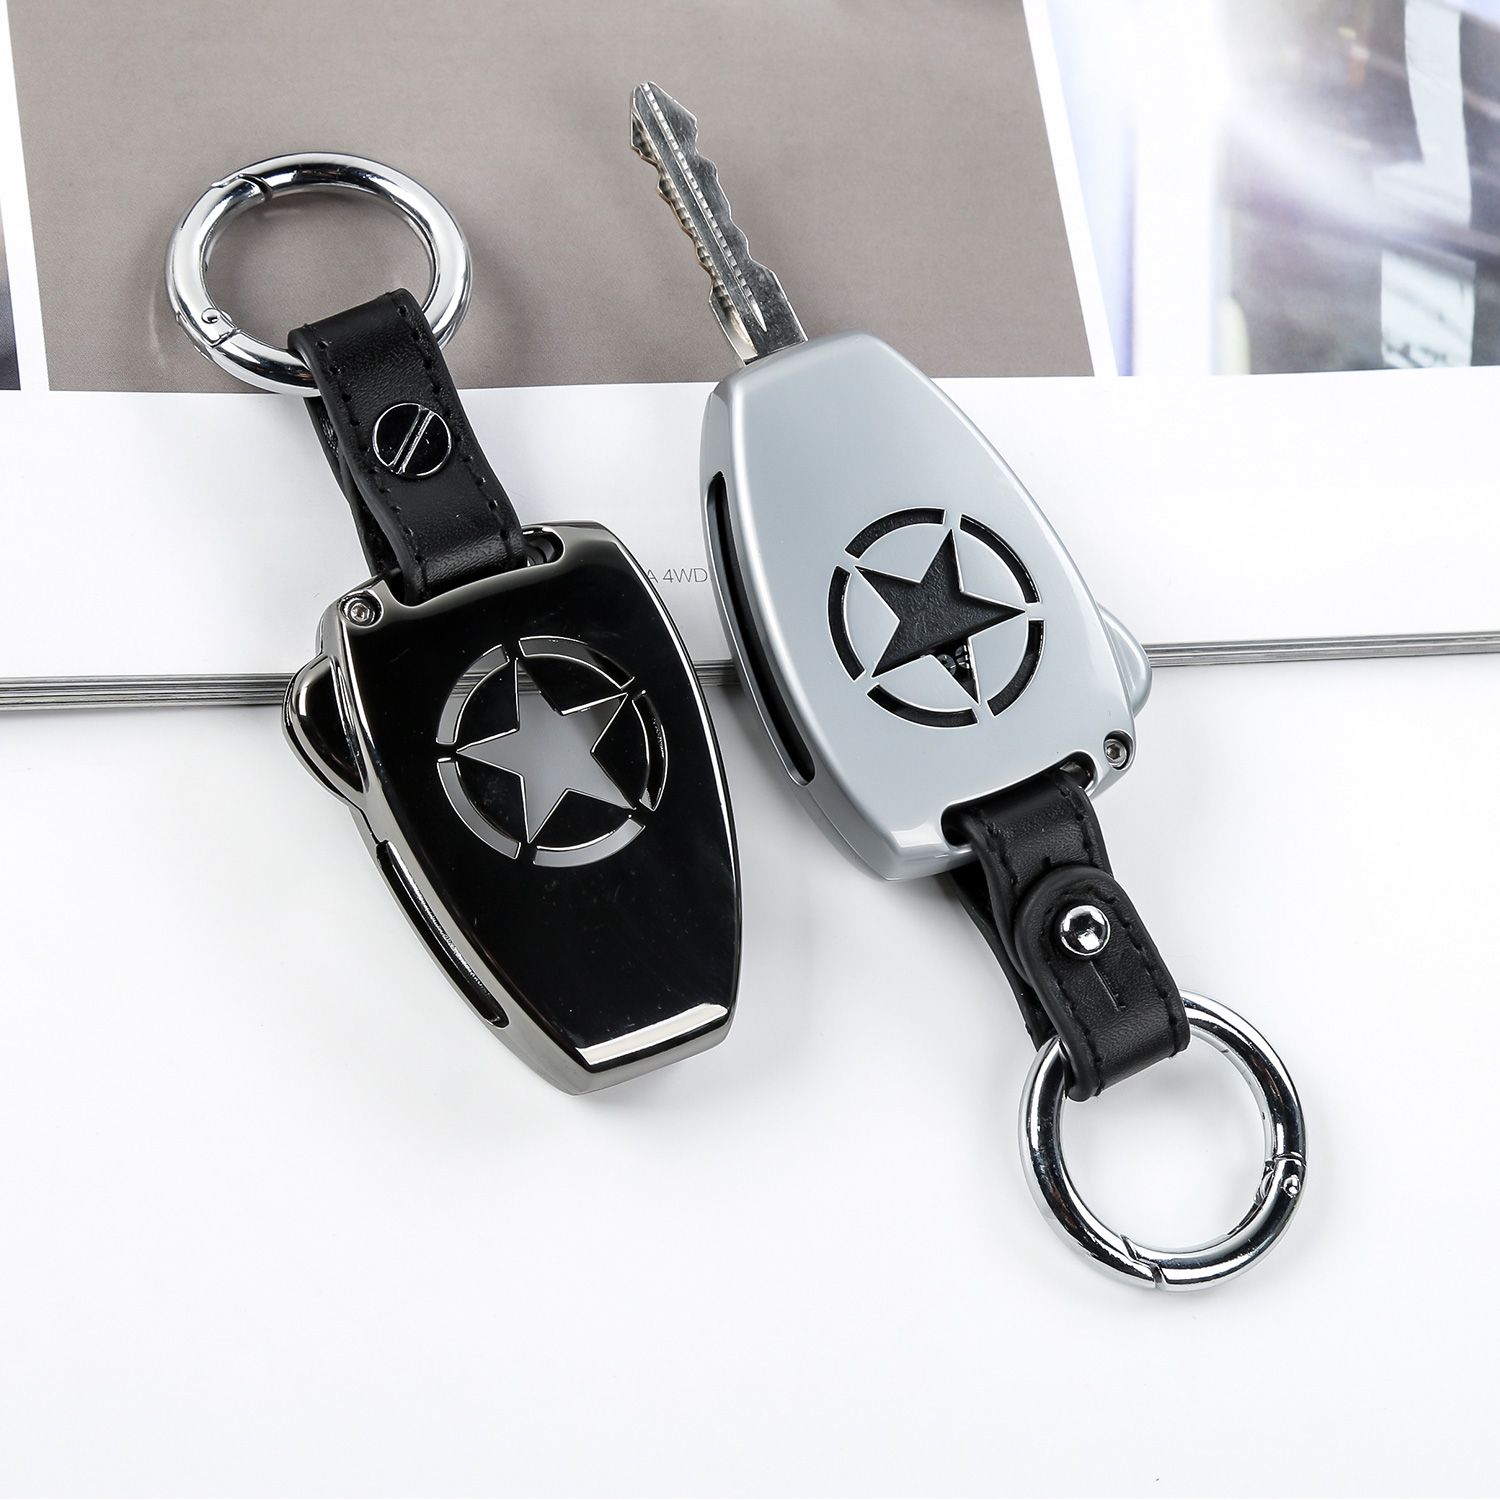 Metal Remote Key Fob Protection Cover With Key Chain For Jeep Wrangler JK  08 17 Car Accessories From Szzt20170724, $ 